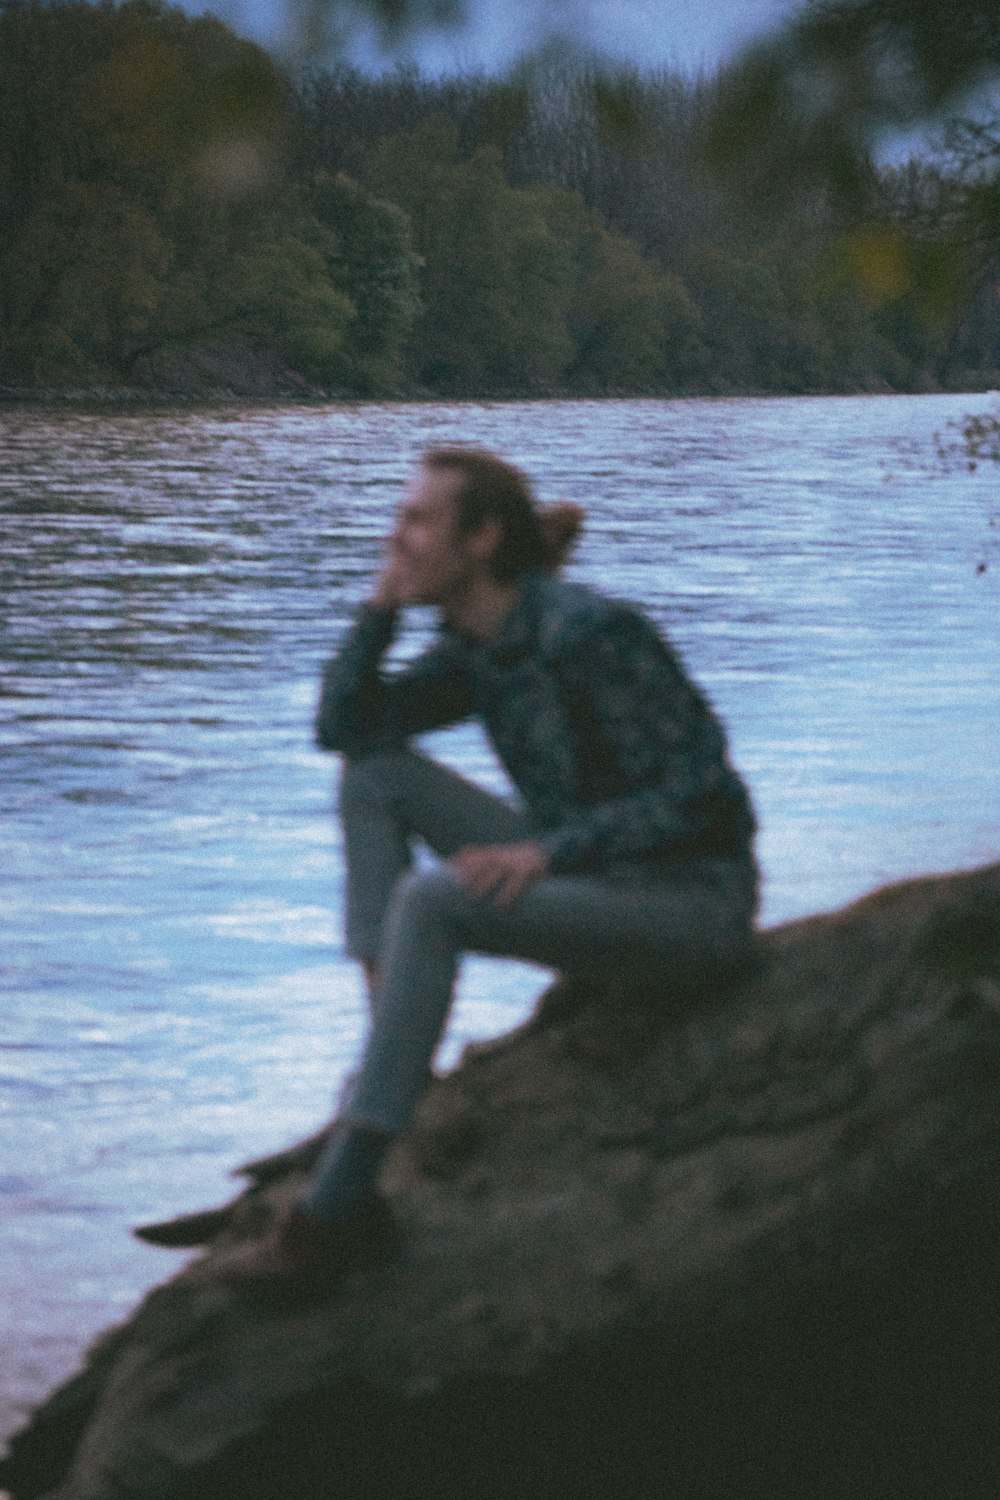 woman in black jacket and gray pants sitting on rock near body of water during daytime